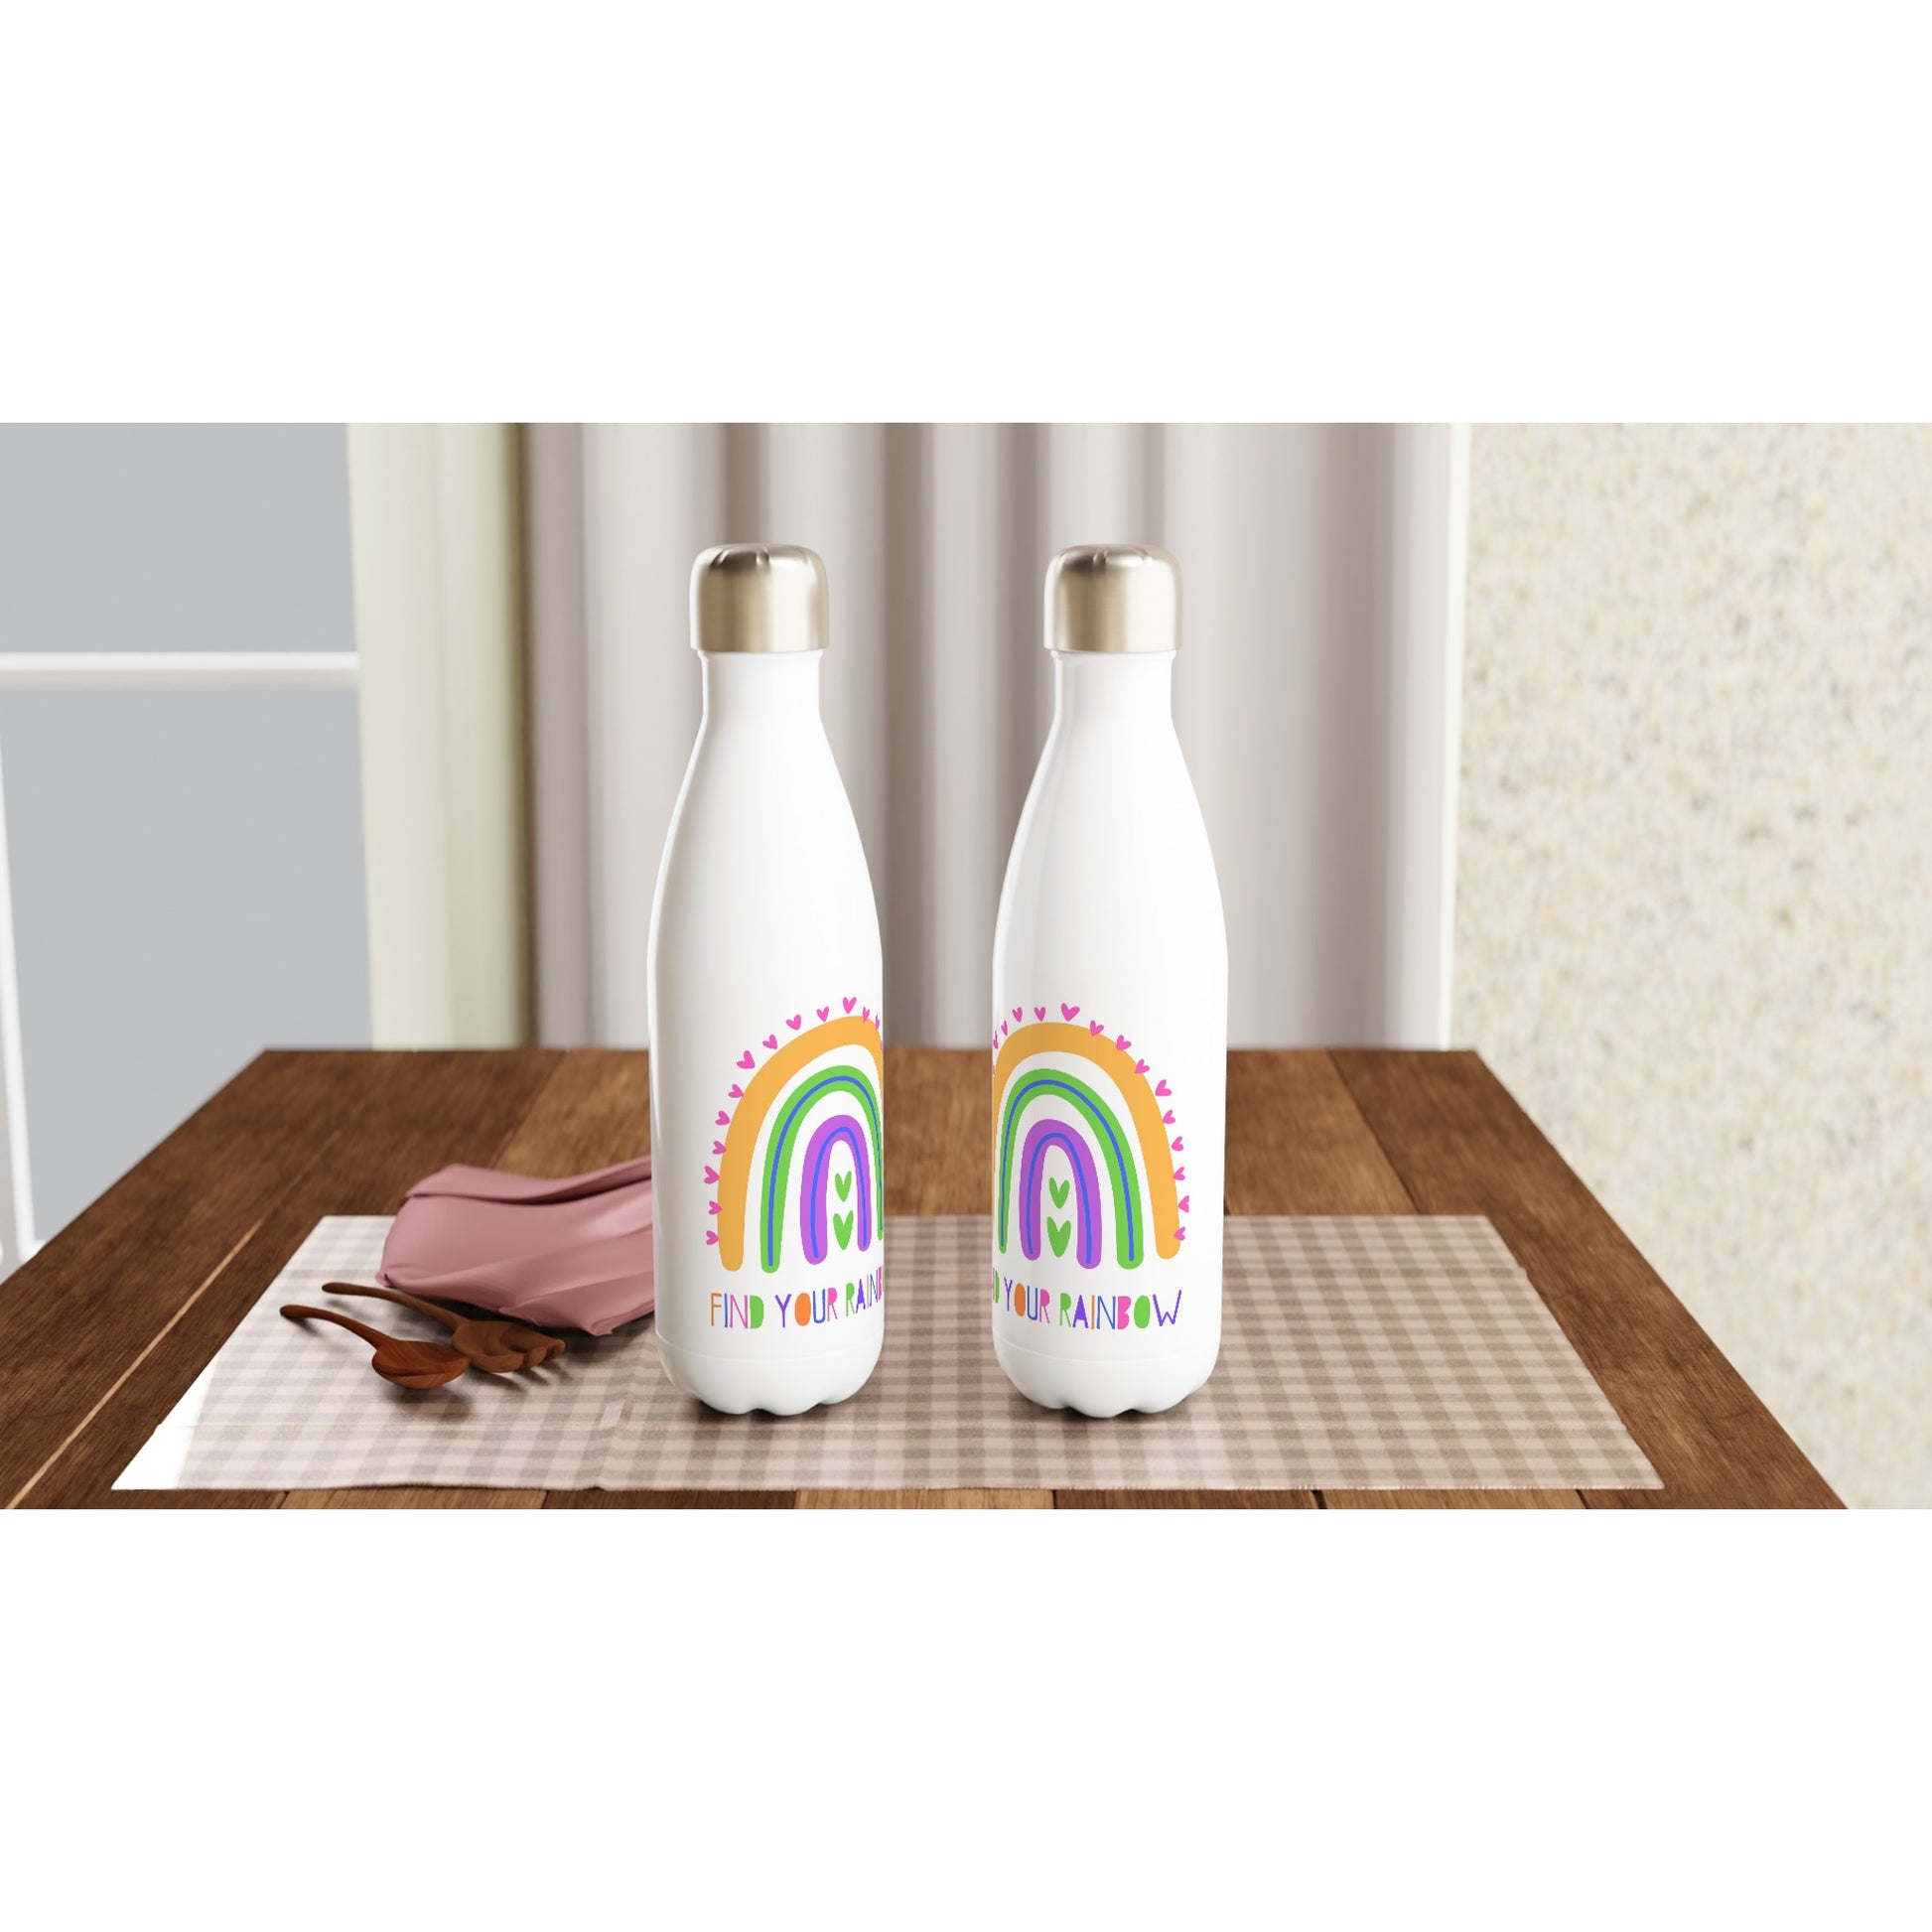 Find Your Rainbow - White 17oz Stainless Steel Water Bottle White Water Bottle